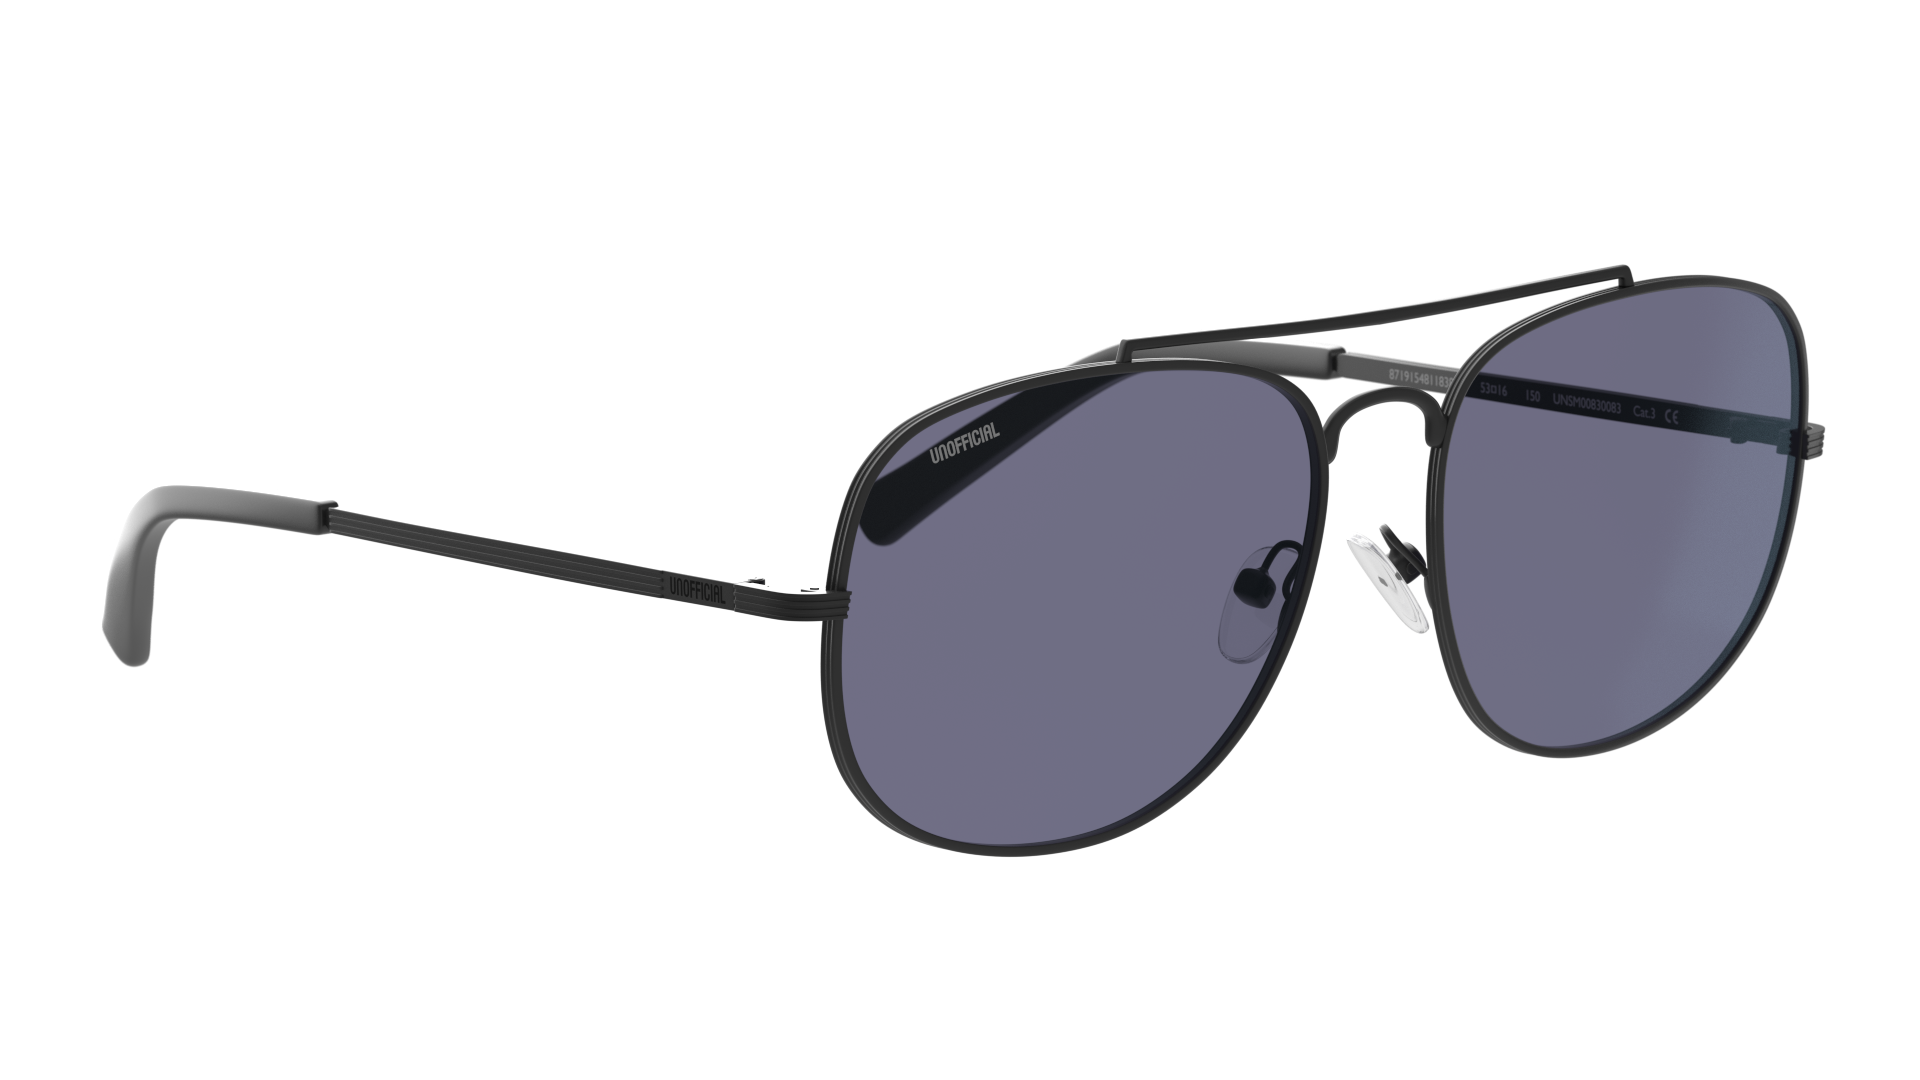 Angle_Right01 Unofficial UNSM0099 Sunglasses Grey / Black